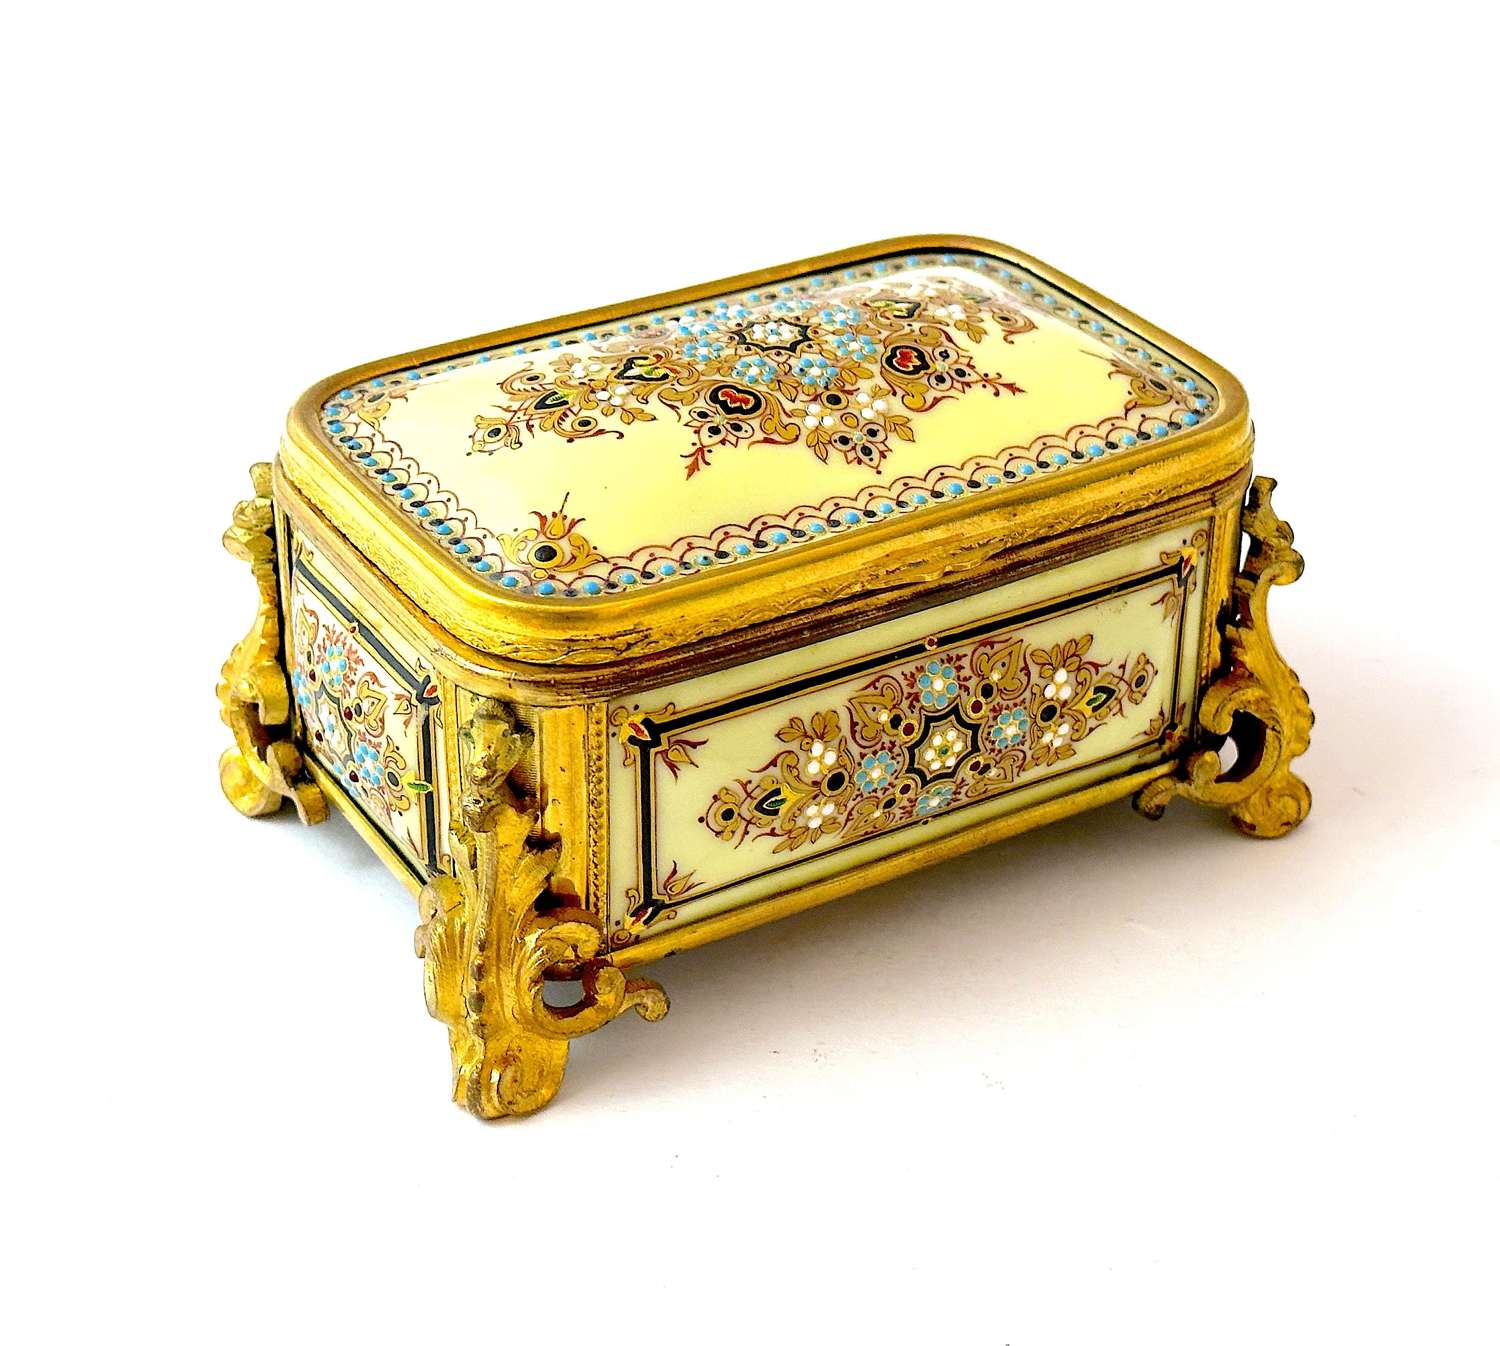 Palais Royal Antique French 'Bombe' Jewel Casket with Enamelled Panels